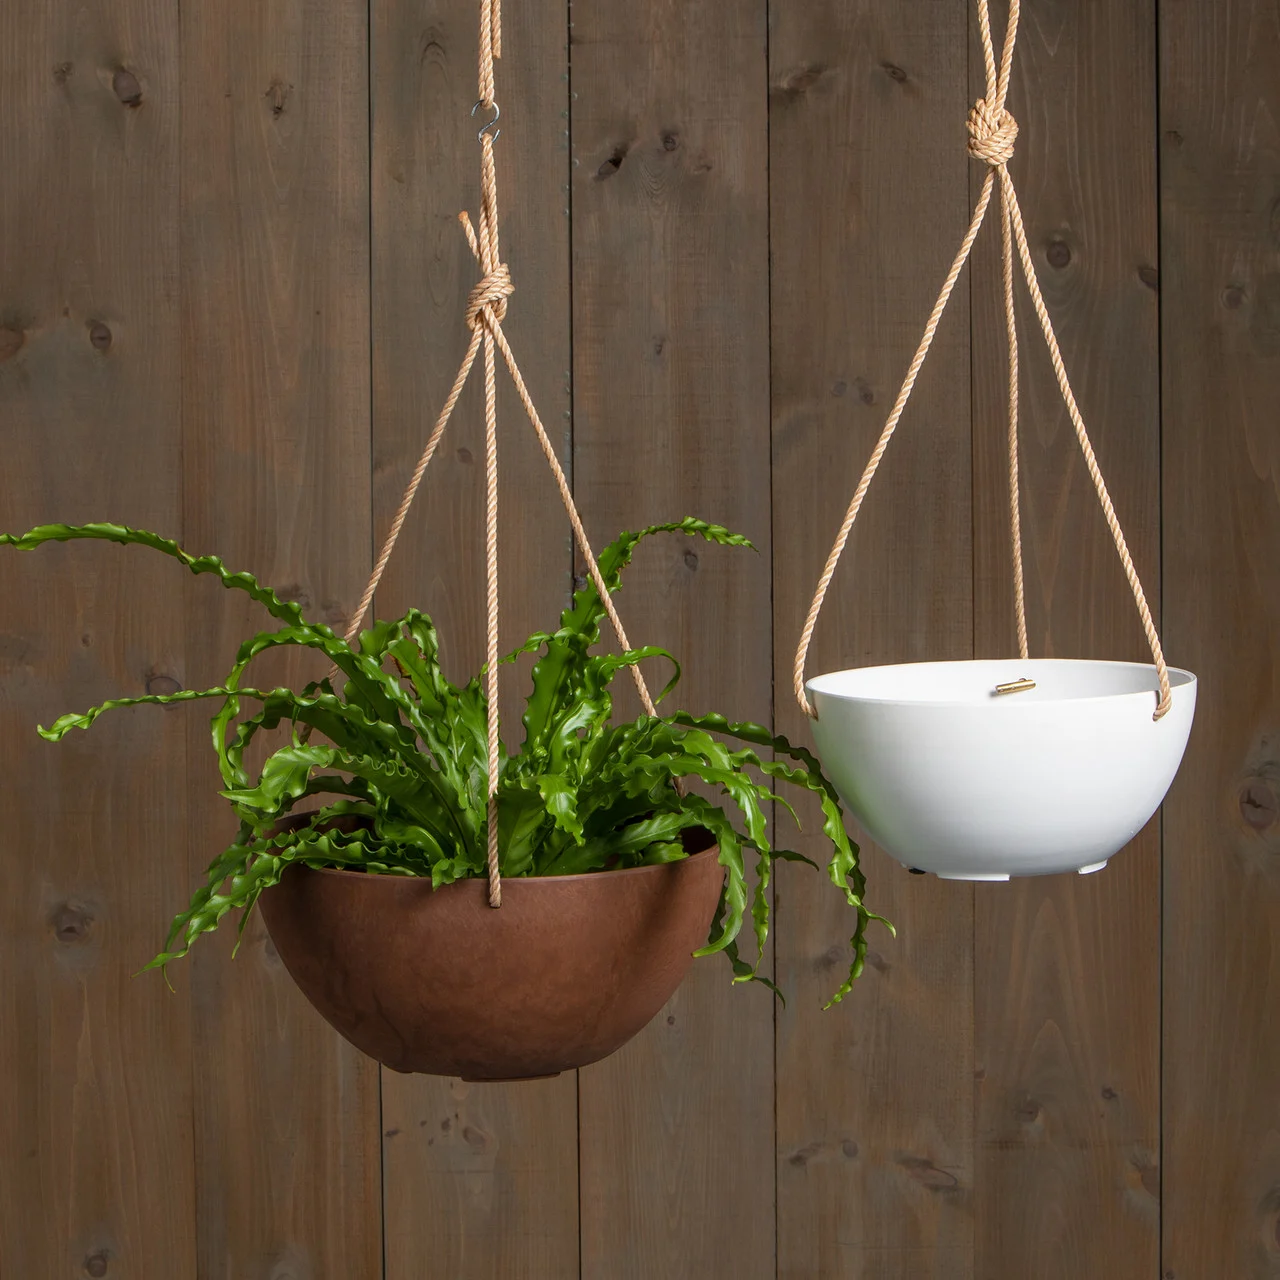 Napa Hanging Bowl Planters from Root & Vessel.